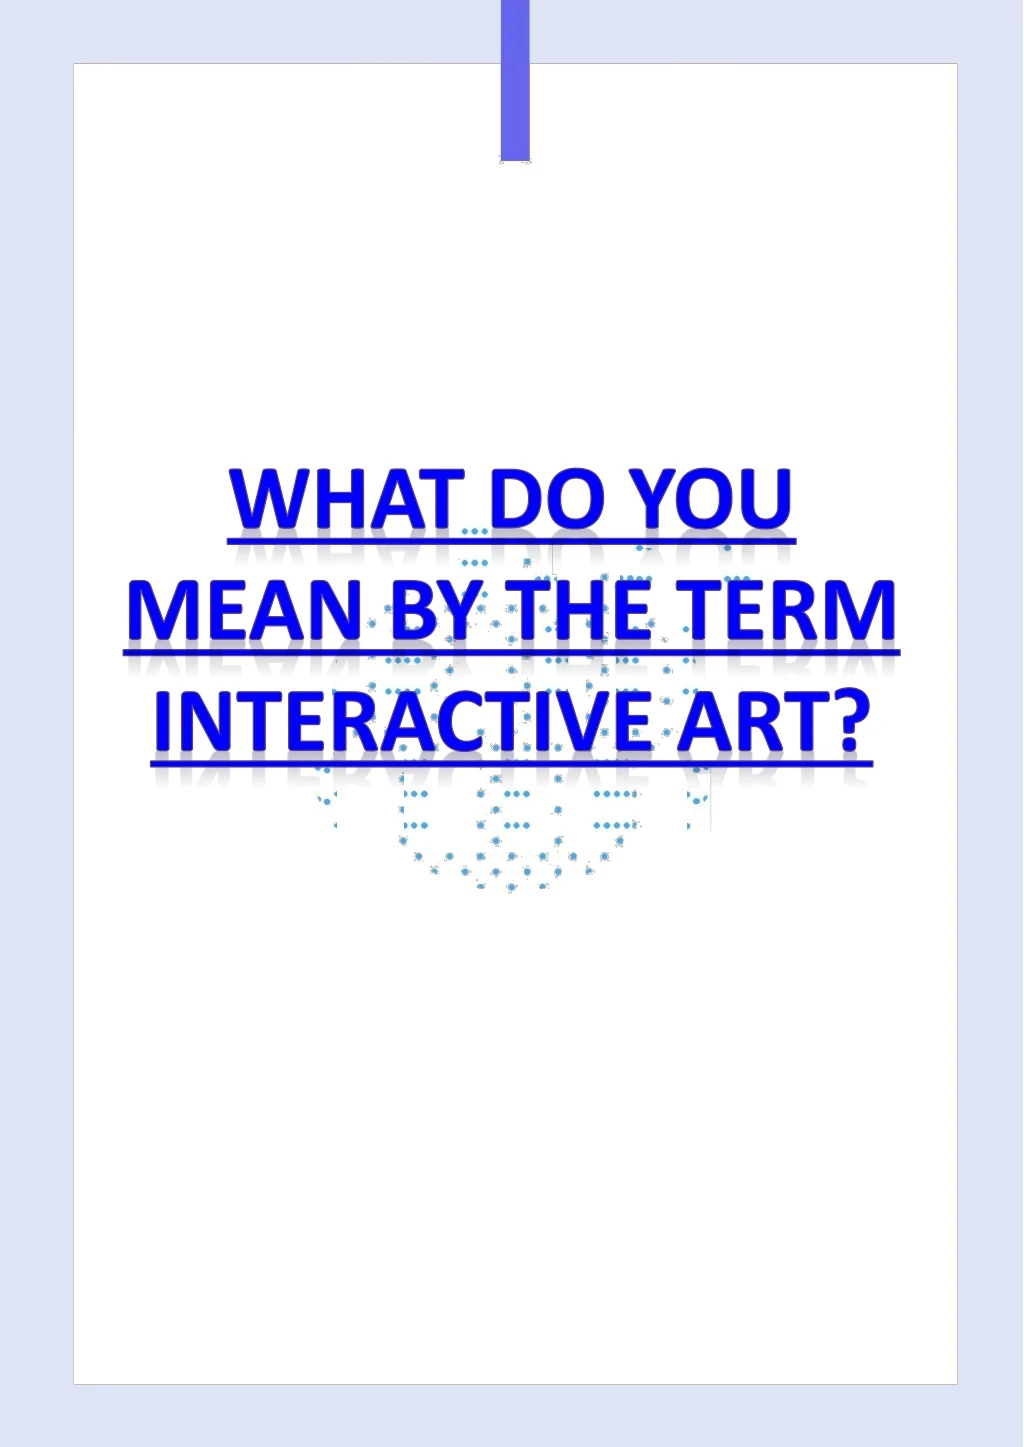 what do you mean by the term interactive art